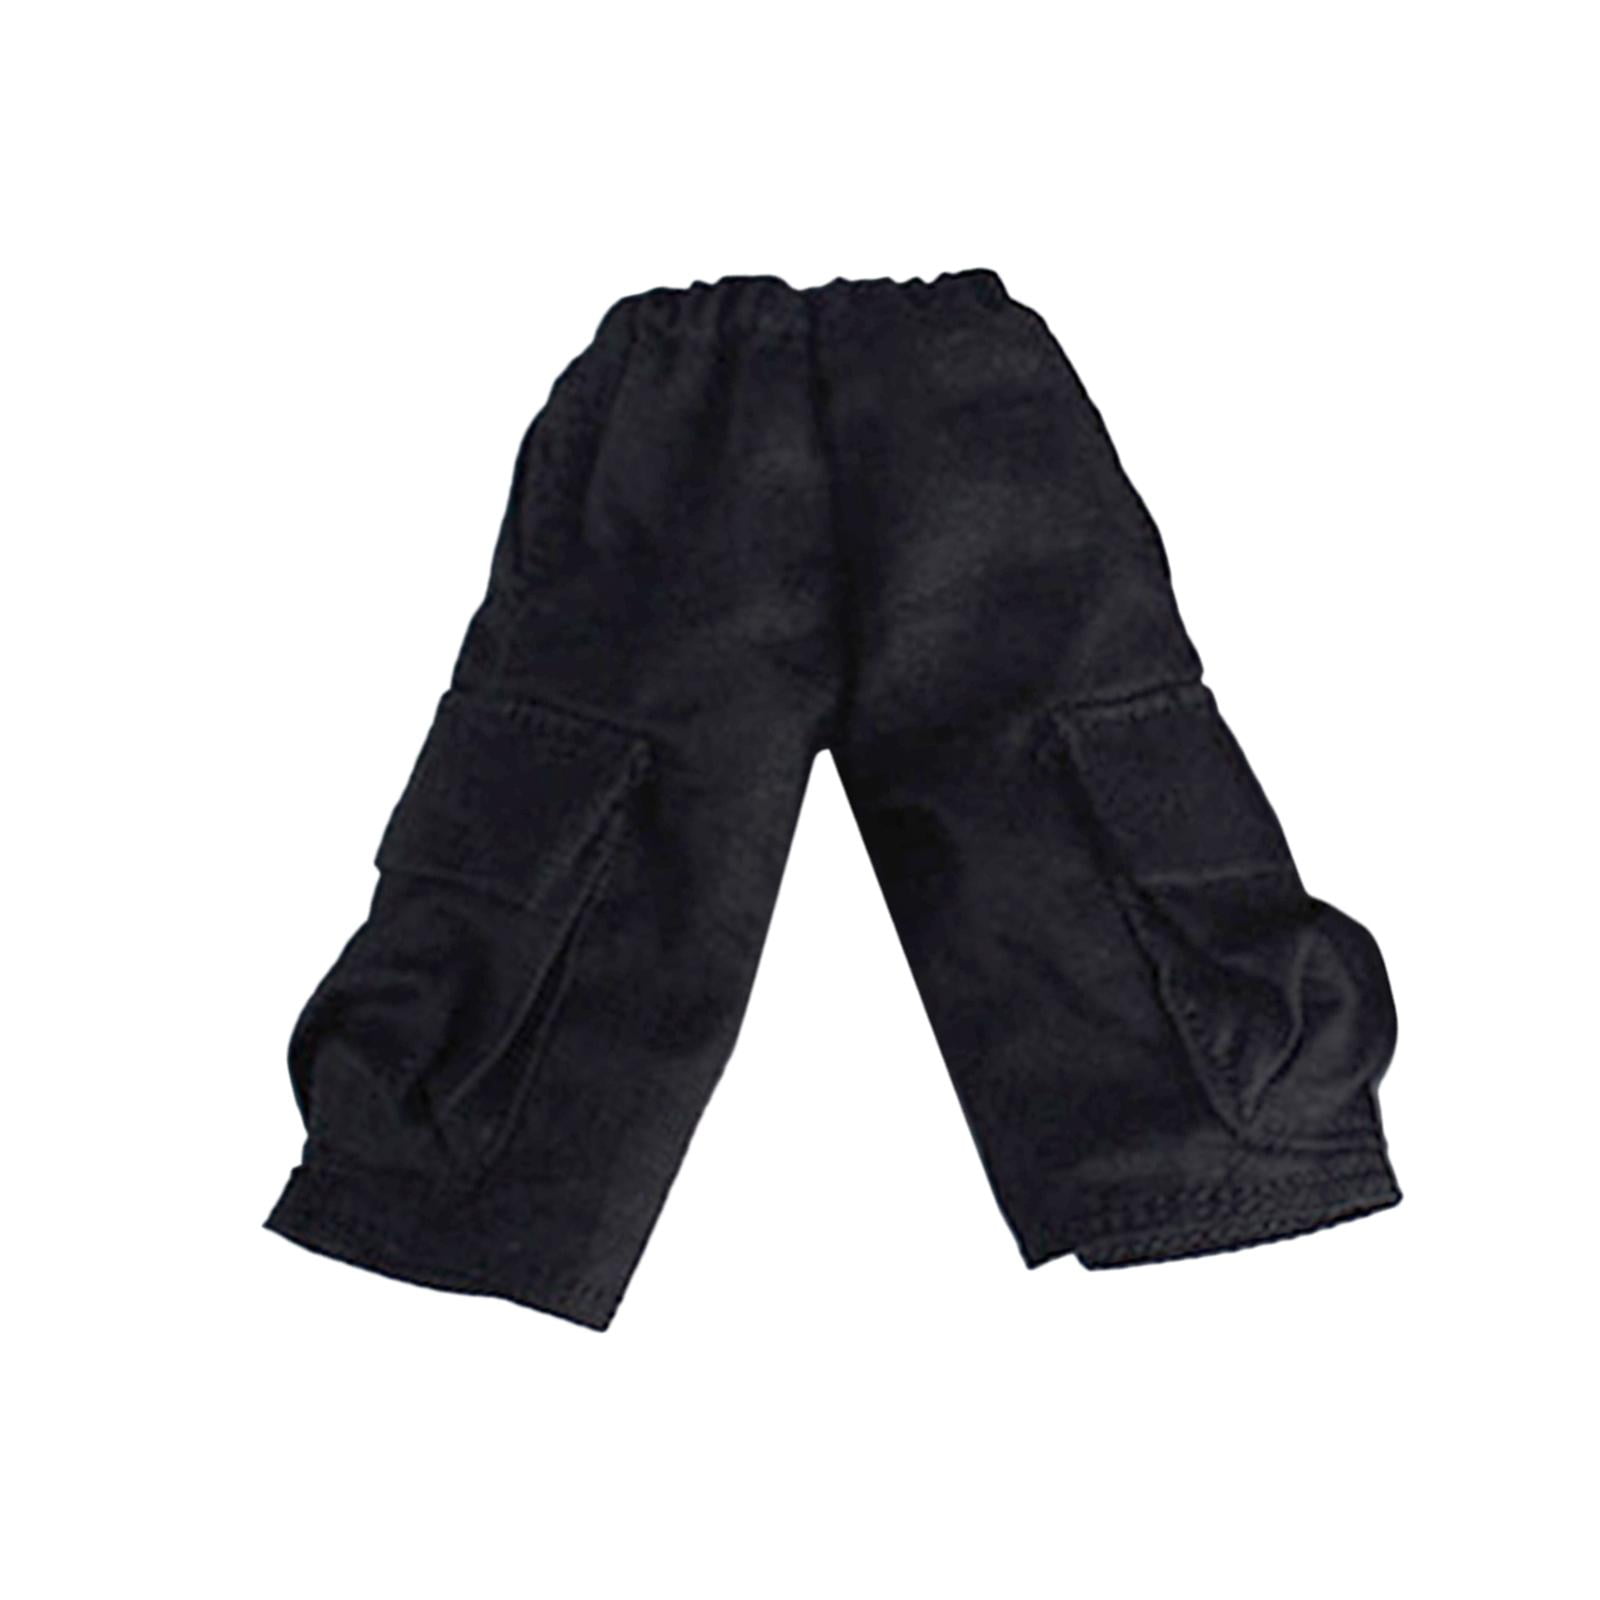 Accessories Scale Extra Black 6inch 1/12 Male with Male Cargo Pockets Pants Figures Action for Figure